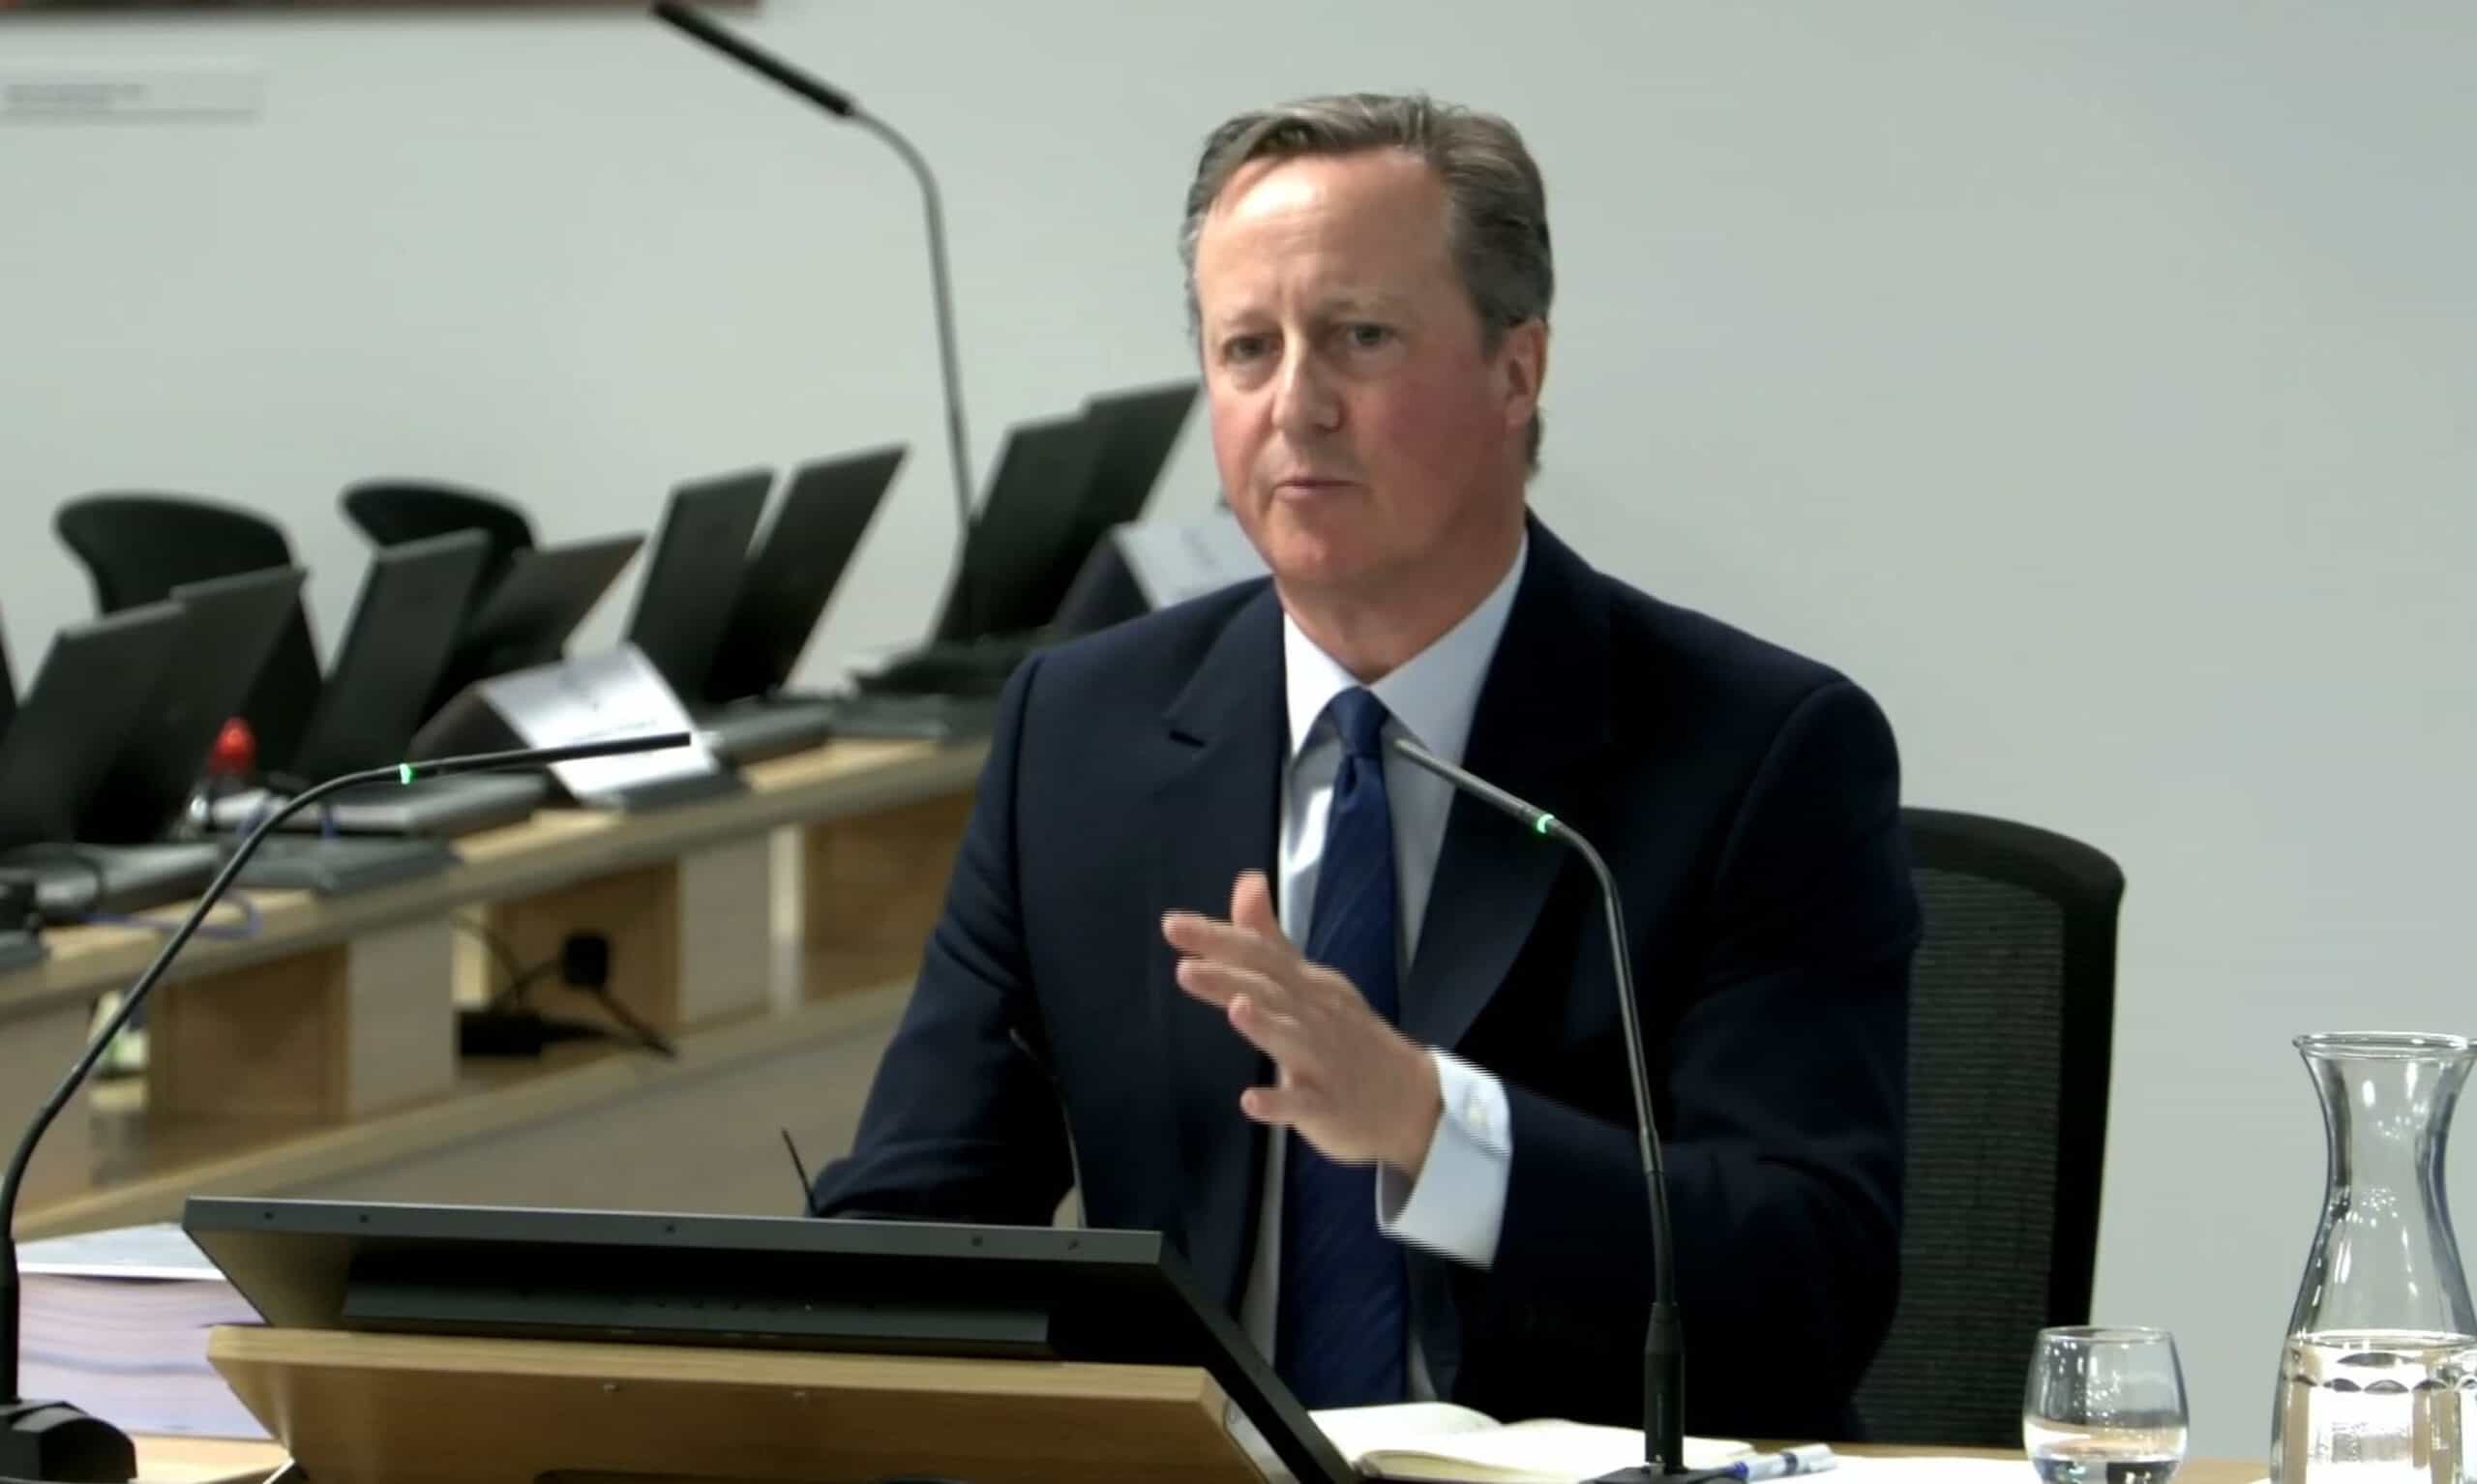 ‘Shame on you’: Cameron heckled as he leaves Covid inquiry